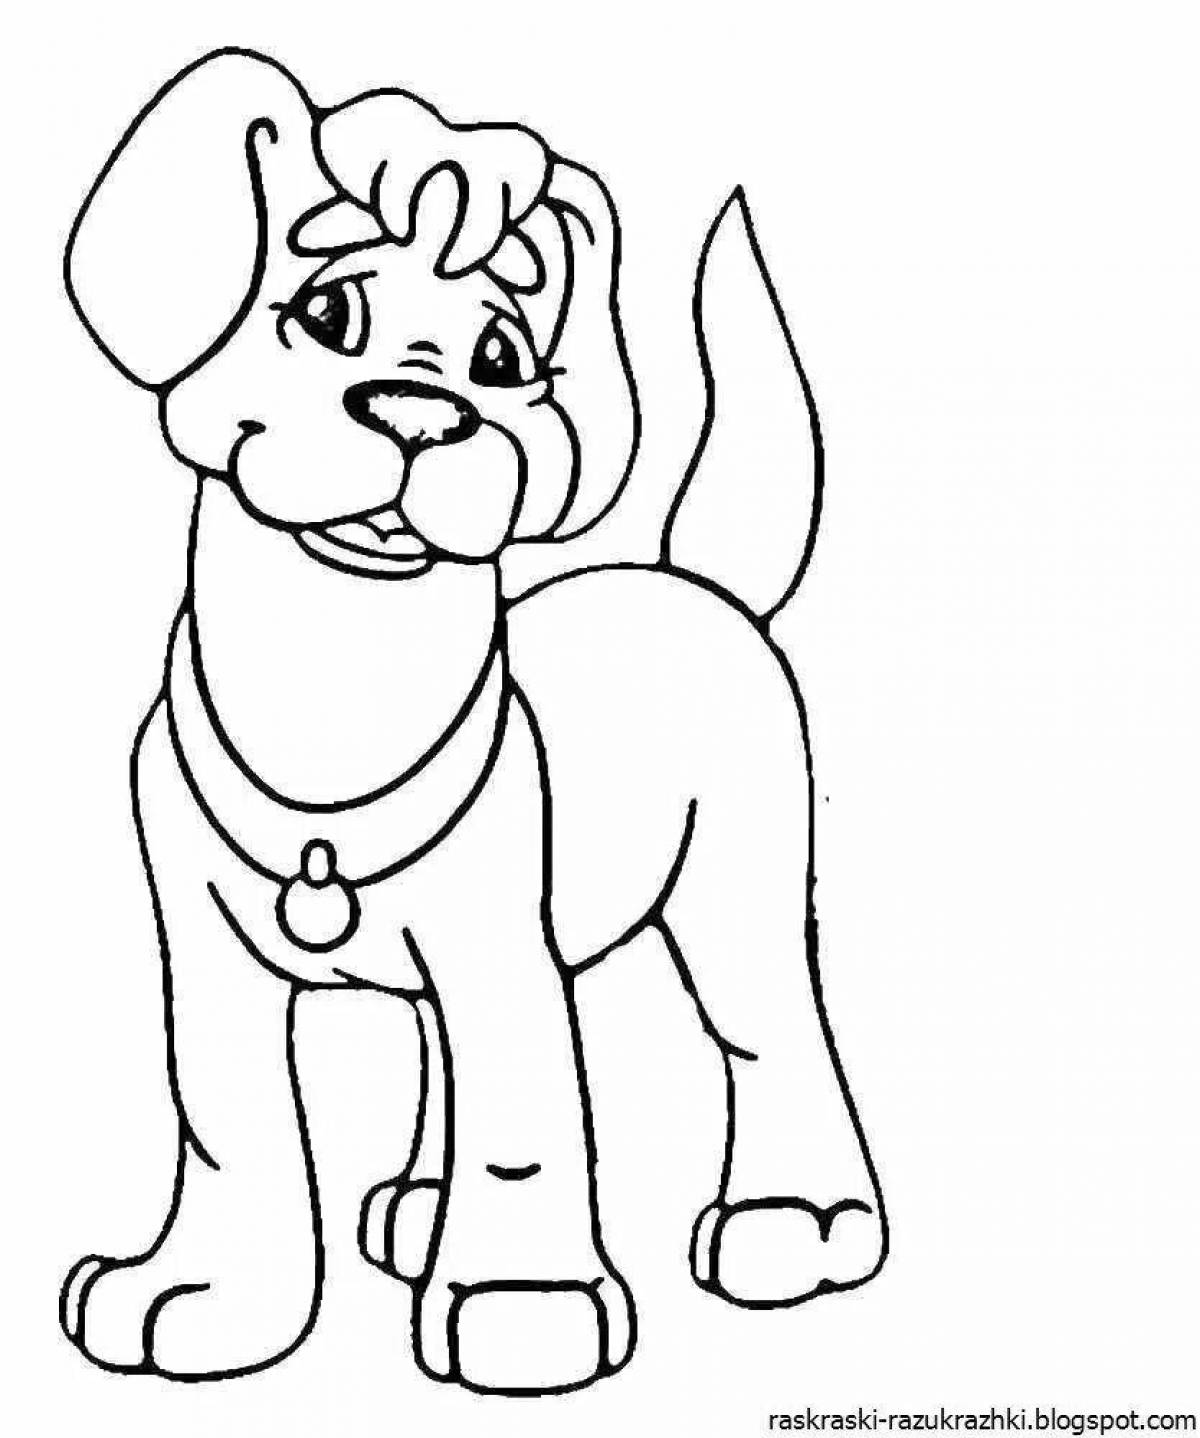 Snuggle dog coloring pages for boys